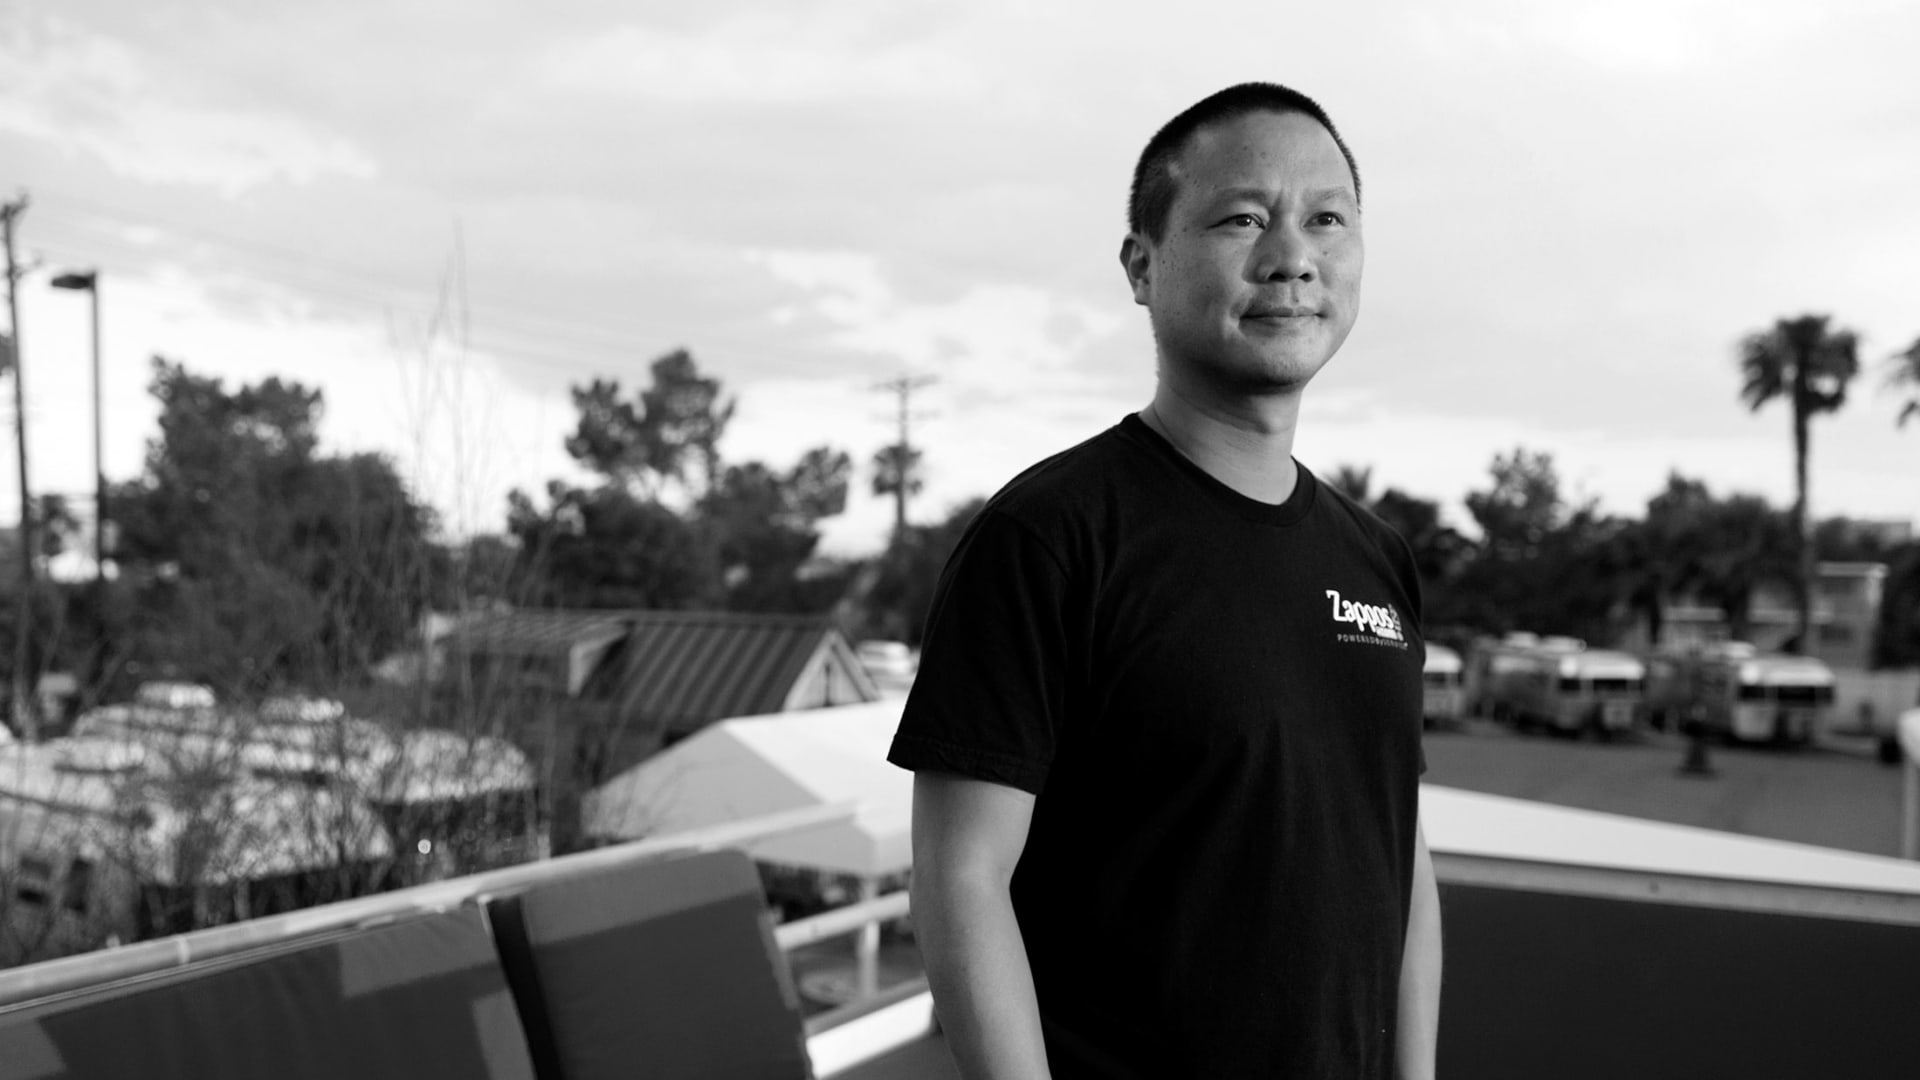 How to Apply for the First Tony Hsieh Award and Win a Ticket to the TED Conference